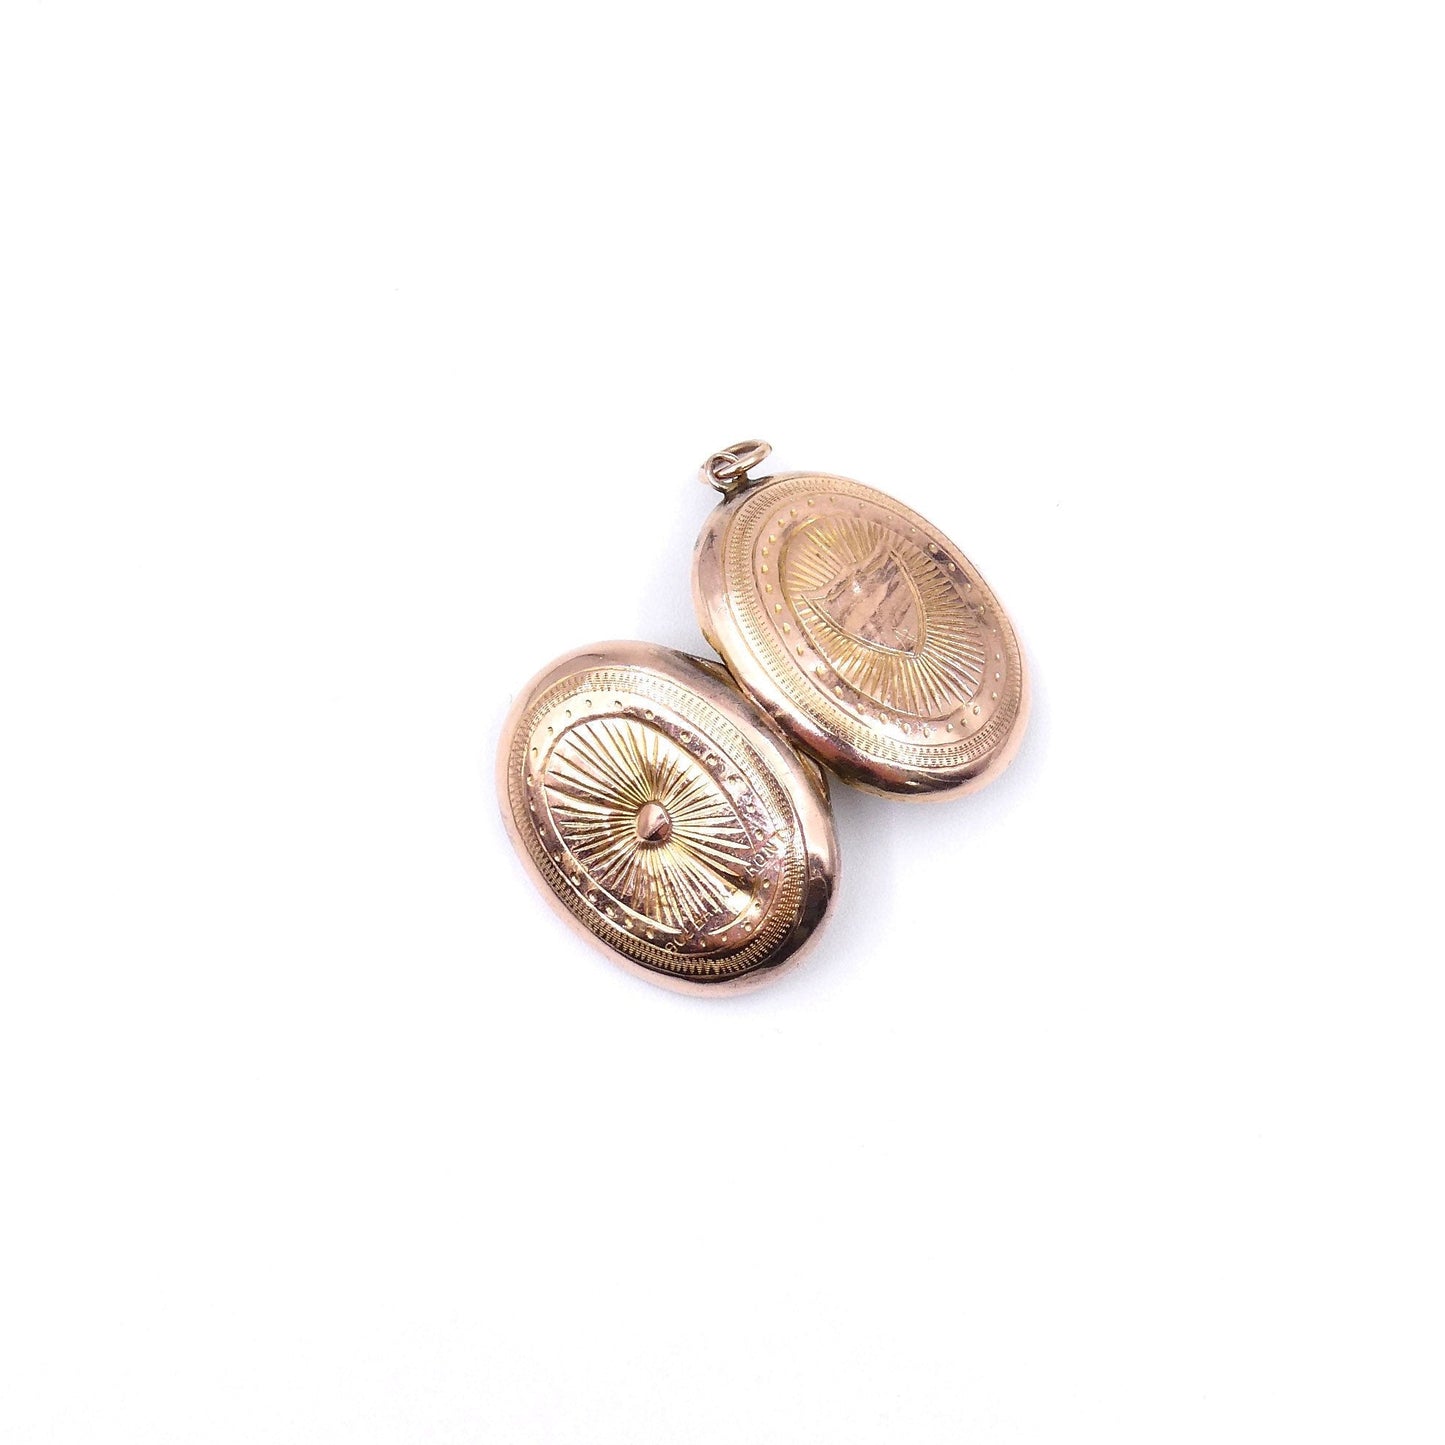 Antique locket in an oval shape, engraved rose gold locket with a shield design. - Collected